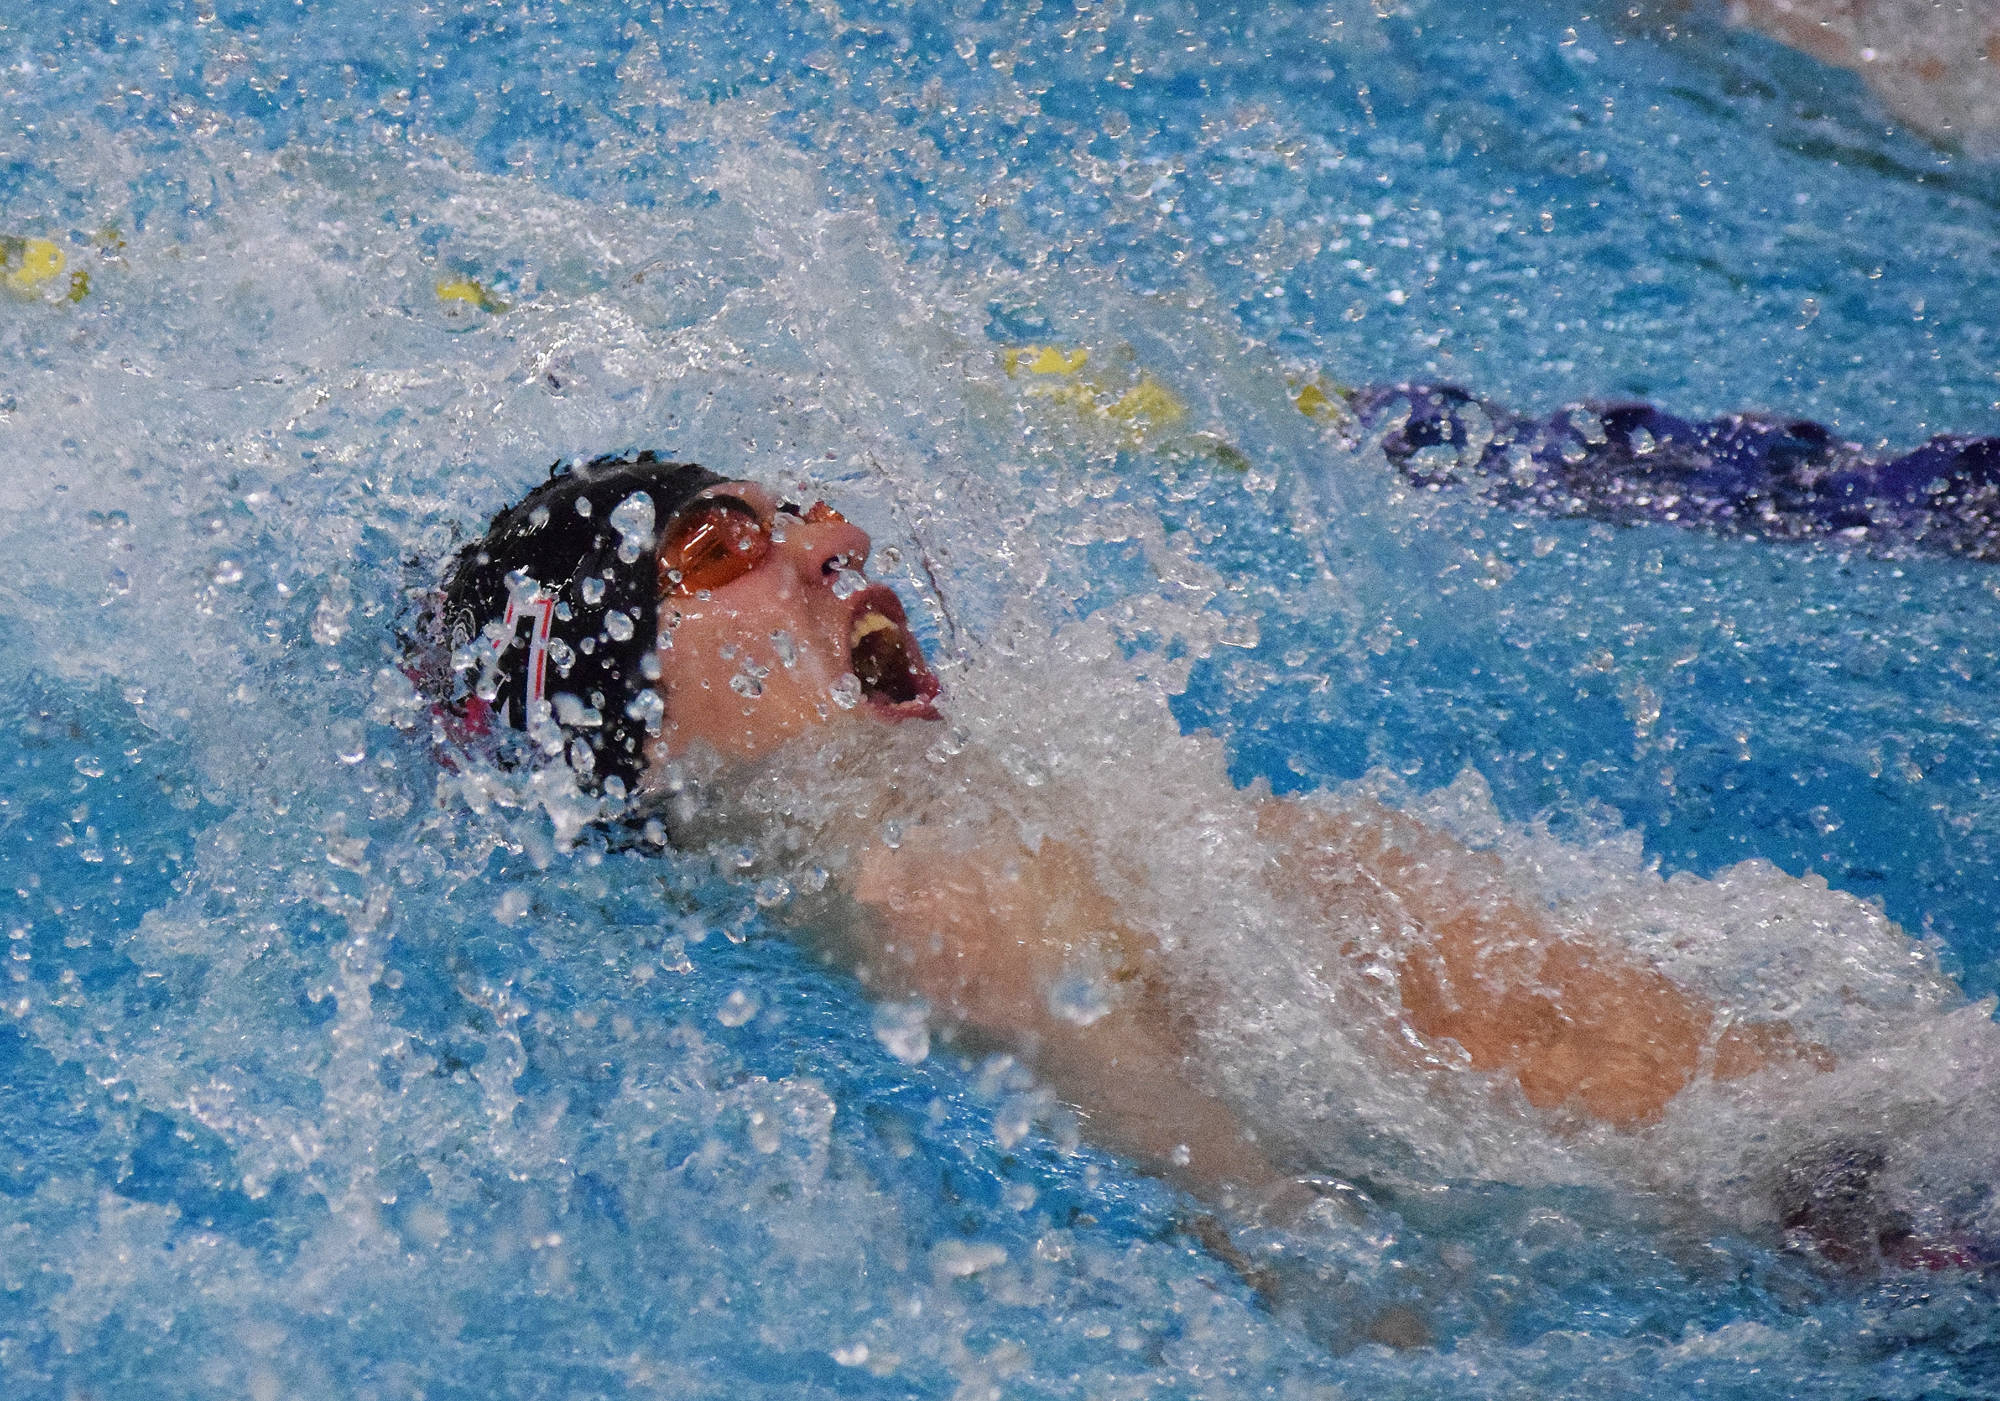 Kenai Central’s Savaii Heaven races to the third-place finish in the boys 100-yard backstroke Saturday at the ASAA First National Bank State Swimming & Diving Championships at the Bartlett High pool. (Photo by Joey Klecka/Peninsula Clarion)